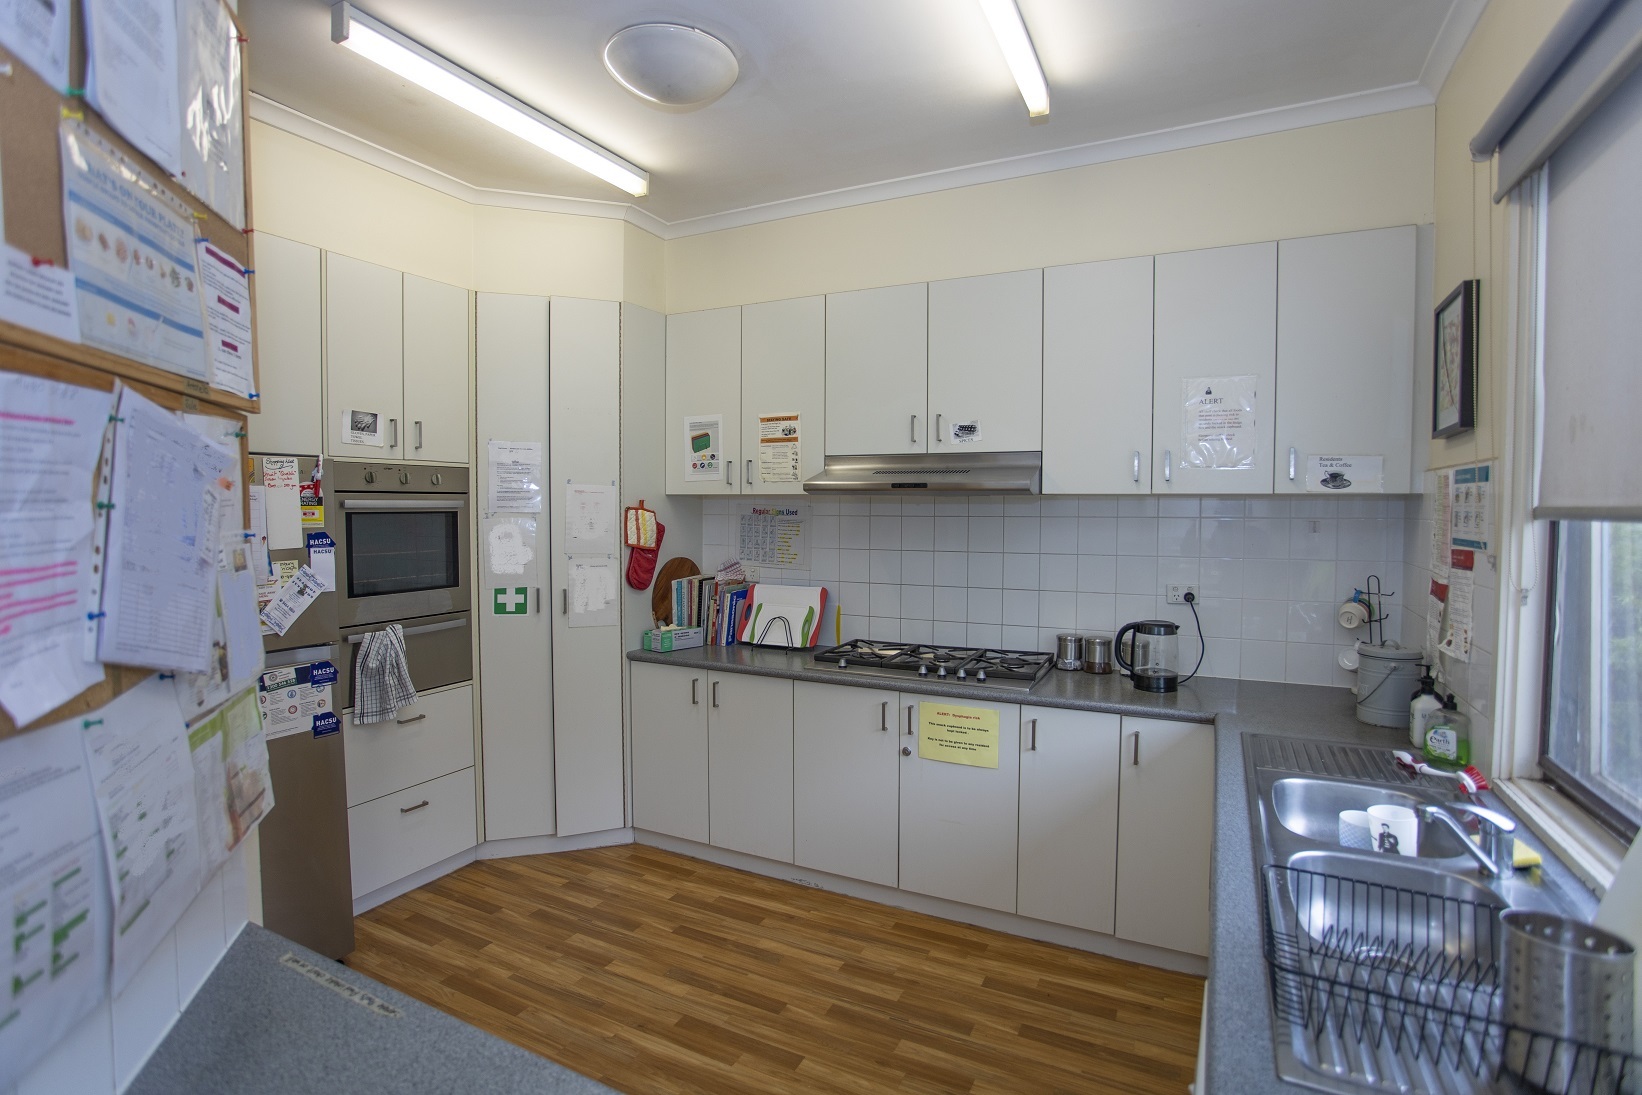 Kitchen area with wooden floorboards